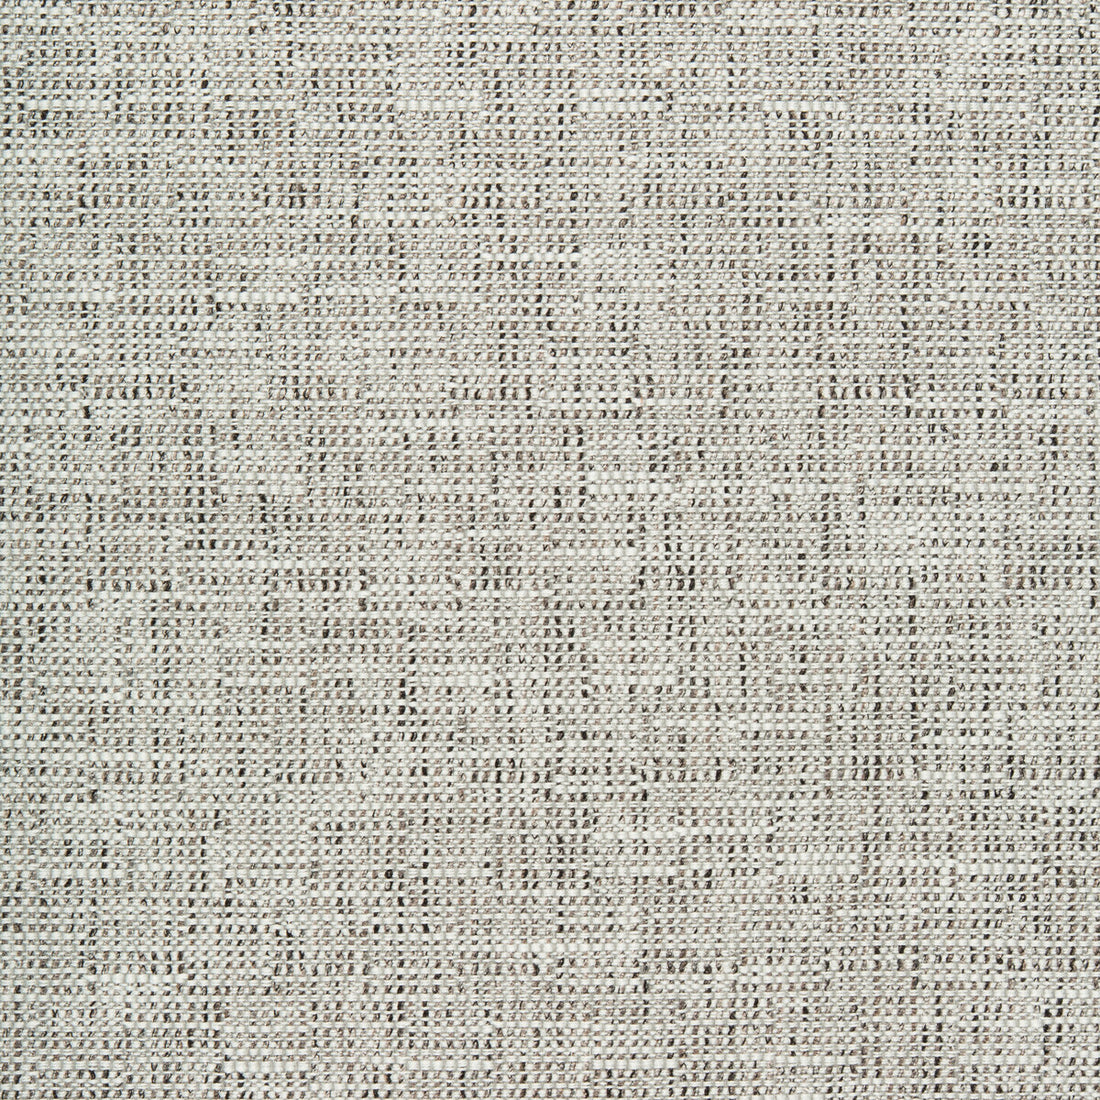 Oaks fabric in granite color - pattern 35980.121.0 - by Kravet Design in the Barry Lantz Canvas To Cloth collection